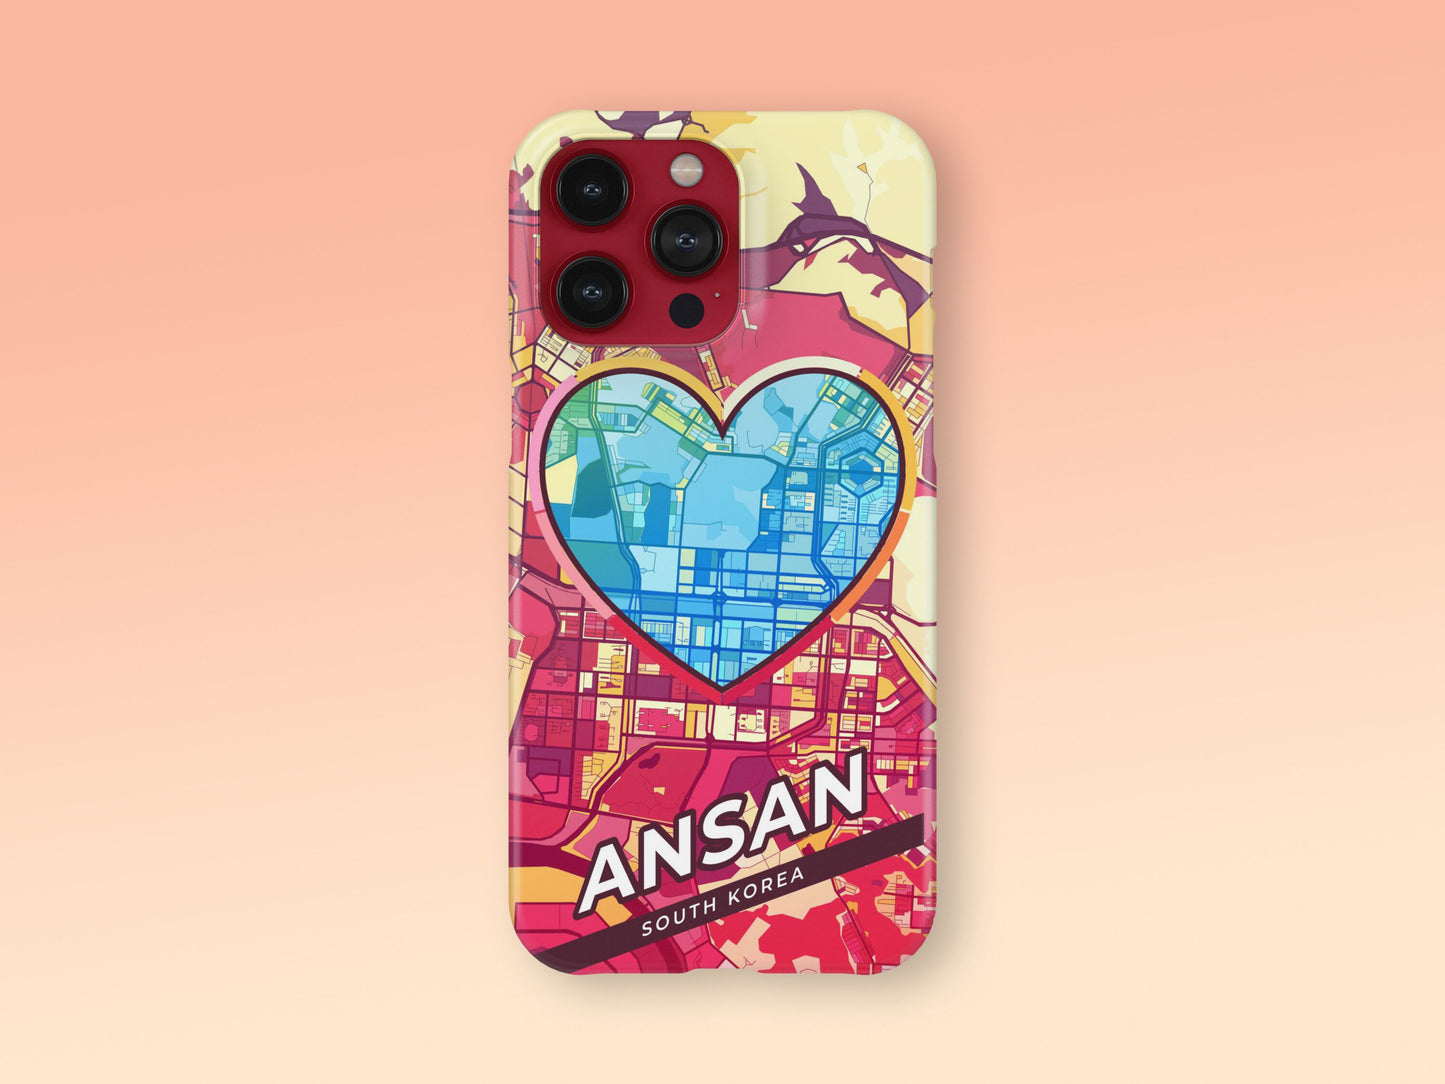 Ansan South Korea slim phone case with colorful icon. Birthday, wedding or housewarming gift. Couple match cases. 2